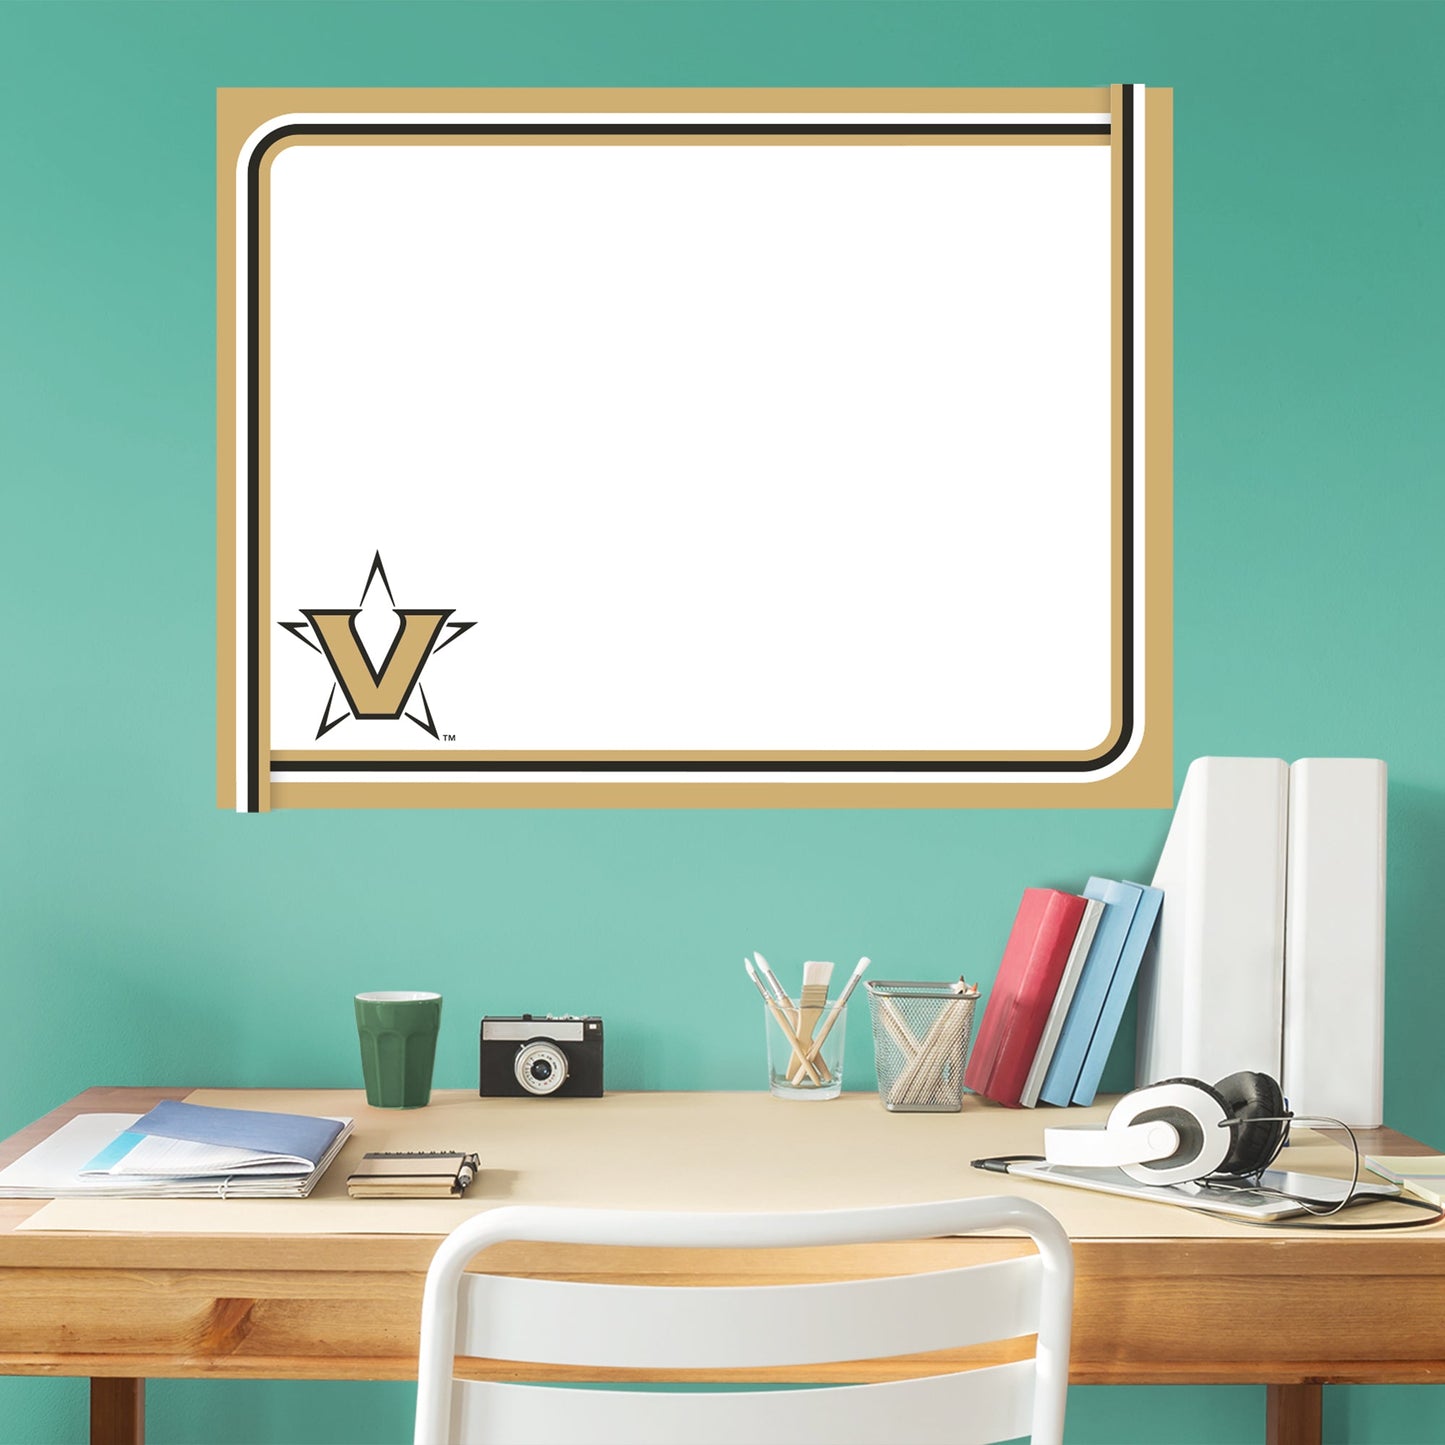 Vanderbilt Commodores: Dry Erase Whiteboard - Officially Licensed NCAA Removable Adhesive Decal